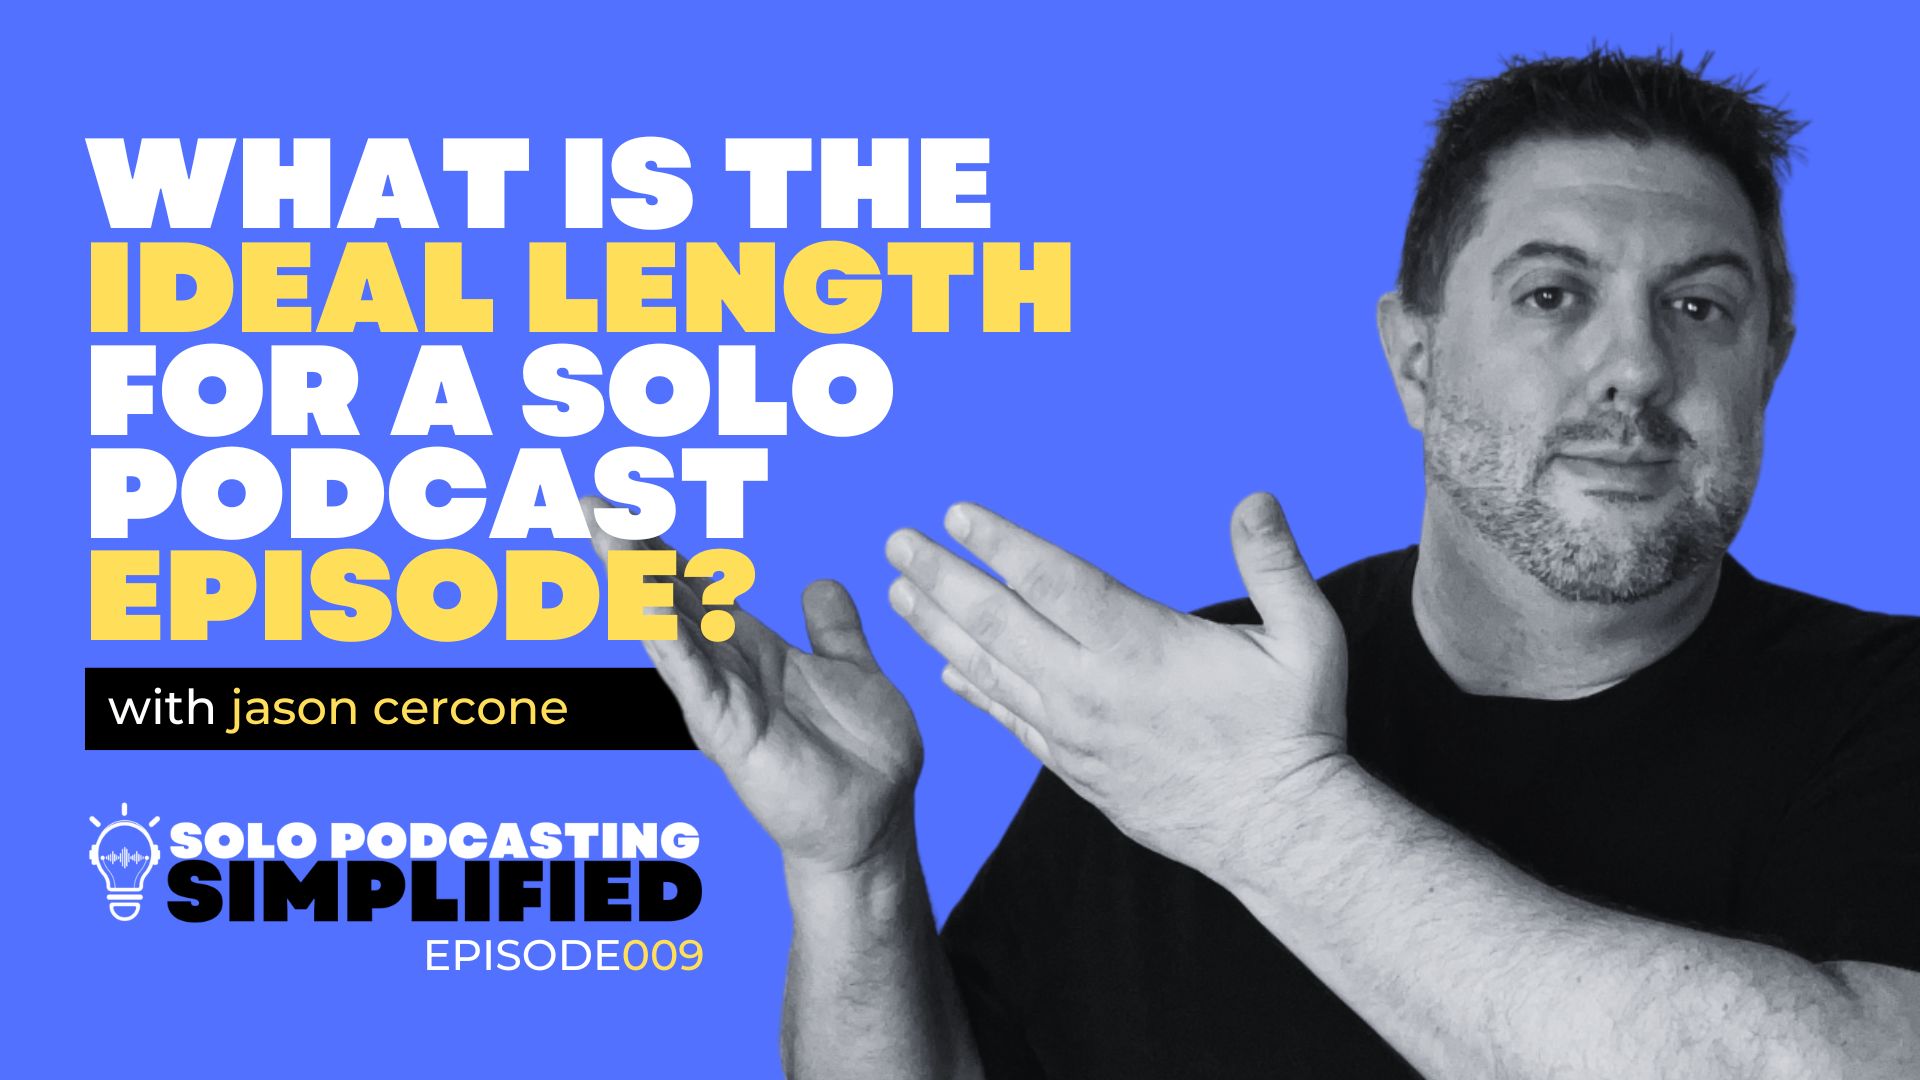 How long should a podcast episode be? Episode 009 of Solo Podcasting Simplified gives you the answer!